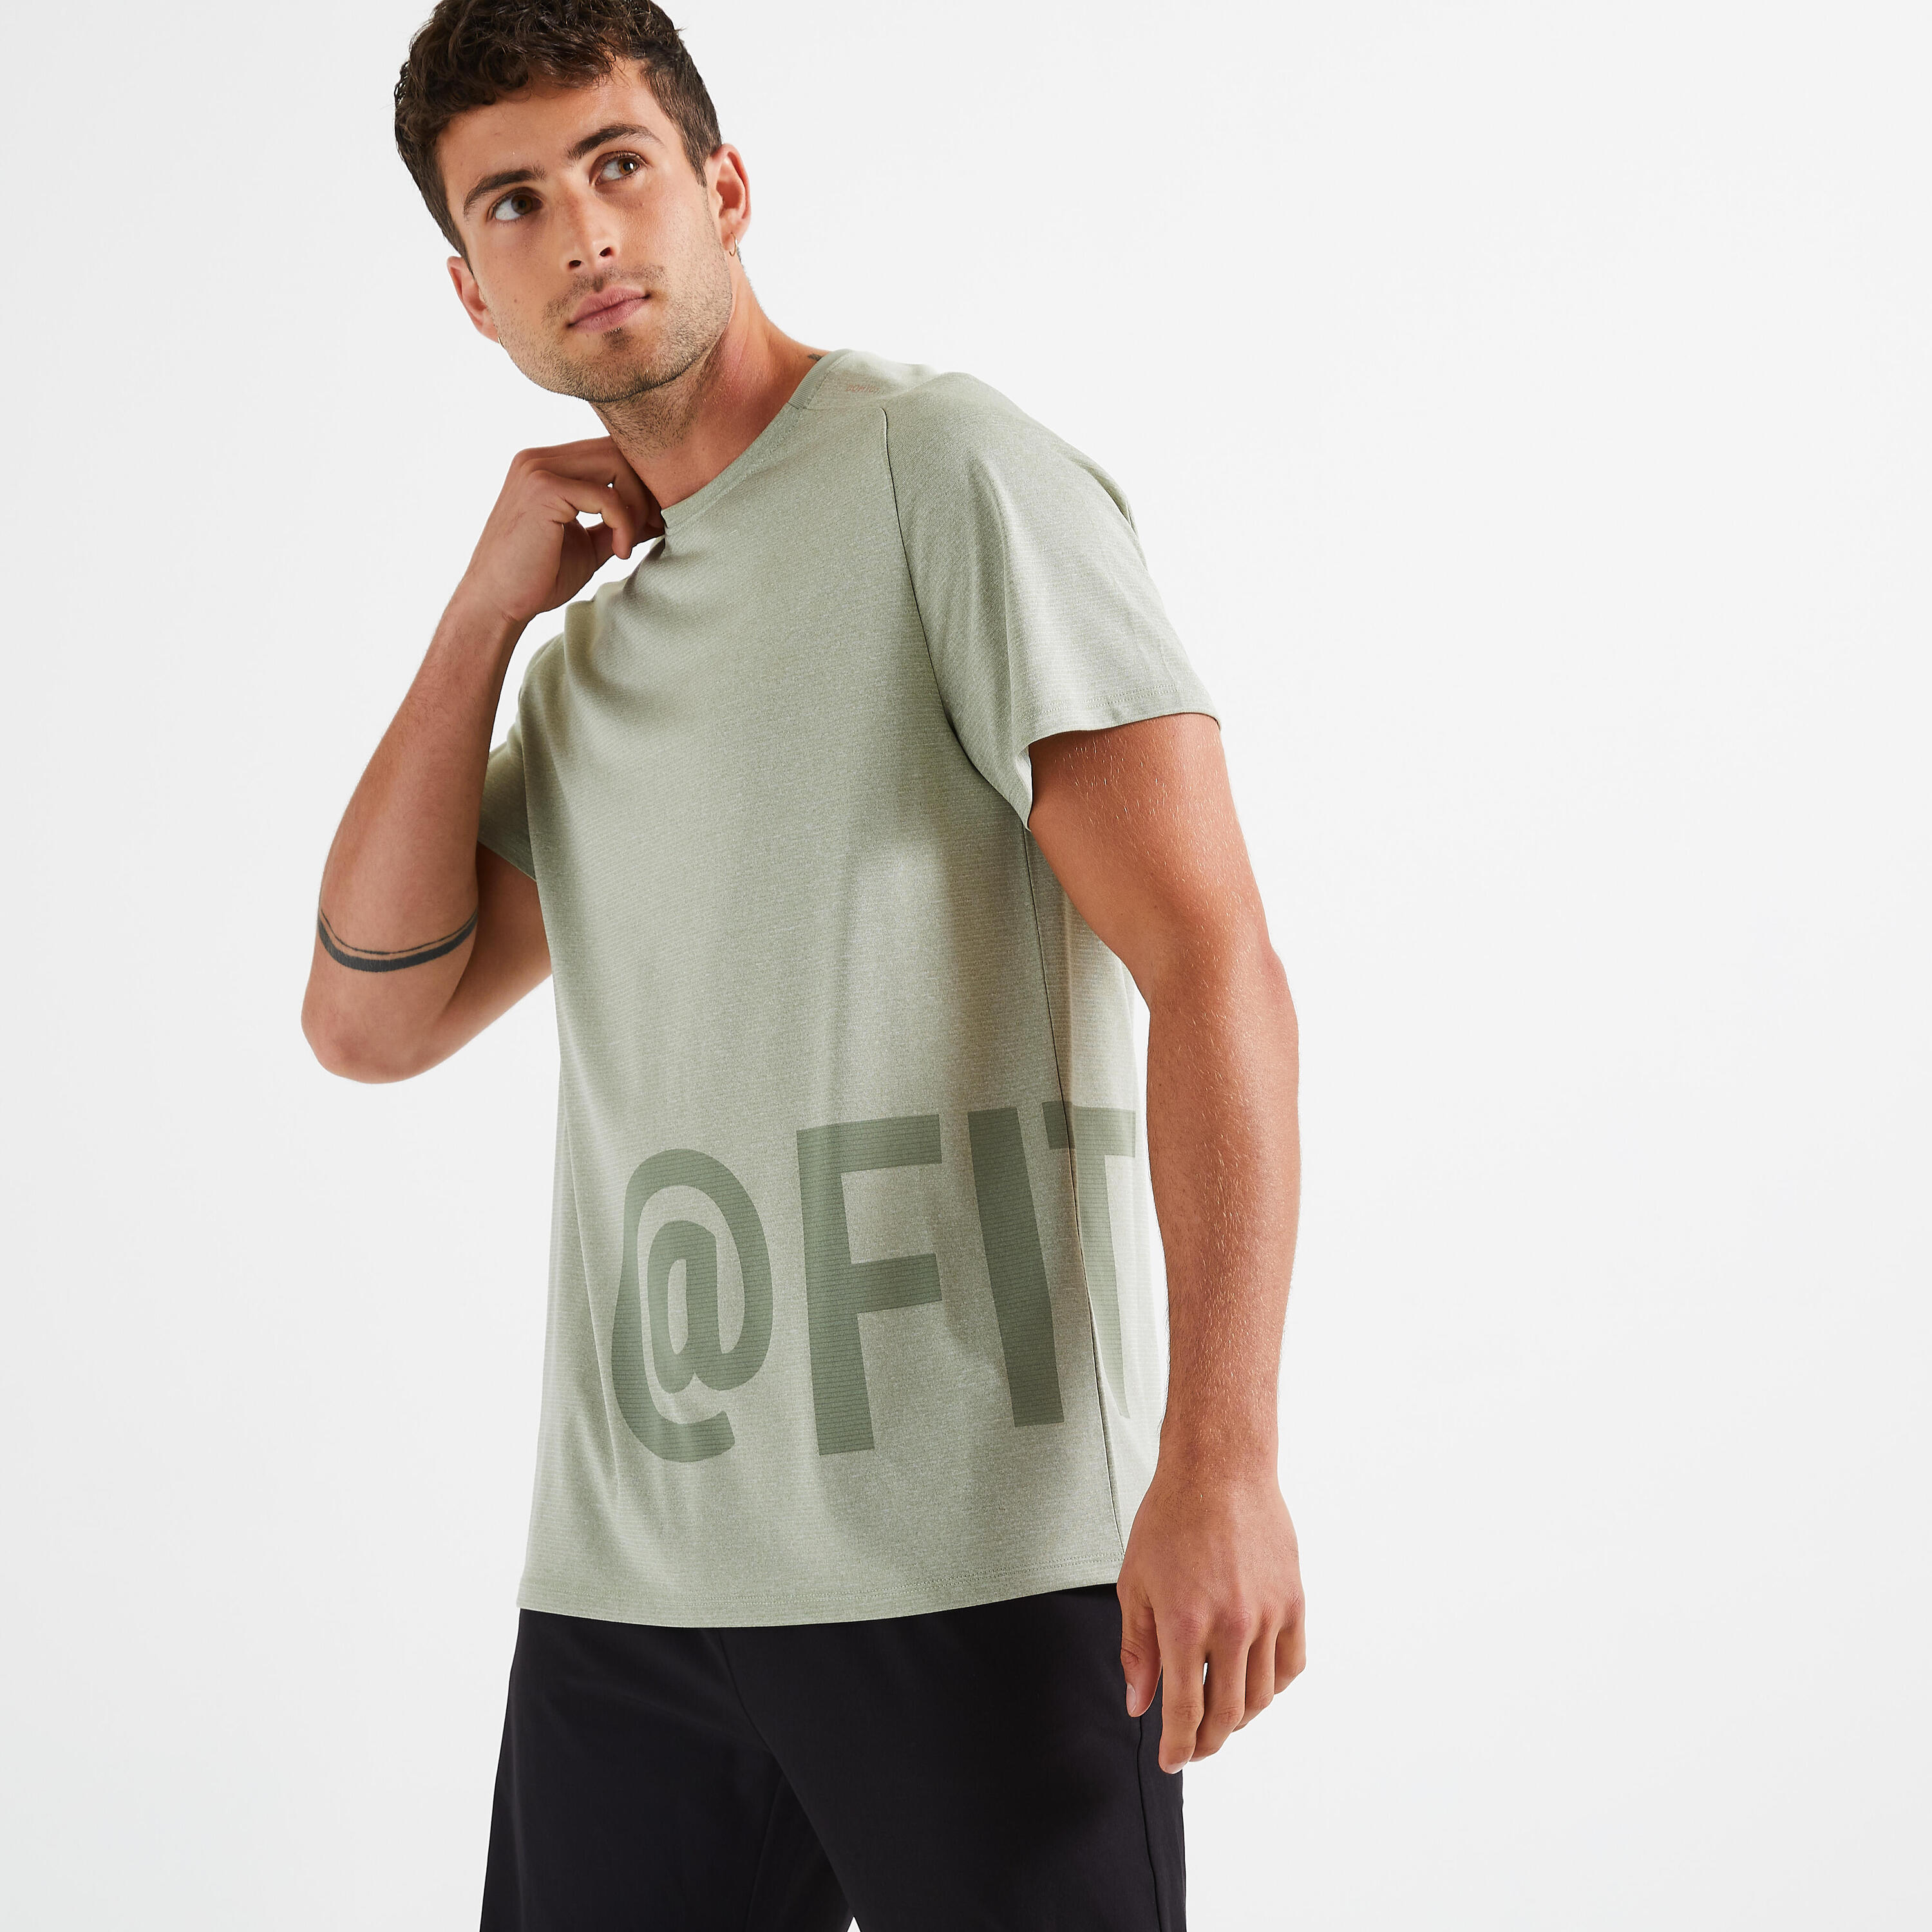 DOMYOS Men's Breathable Crew Neck Fitness Collection T-Shirt - Green Print